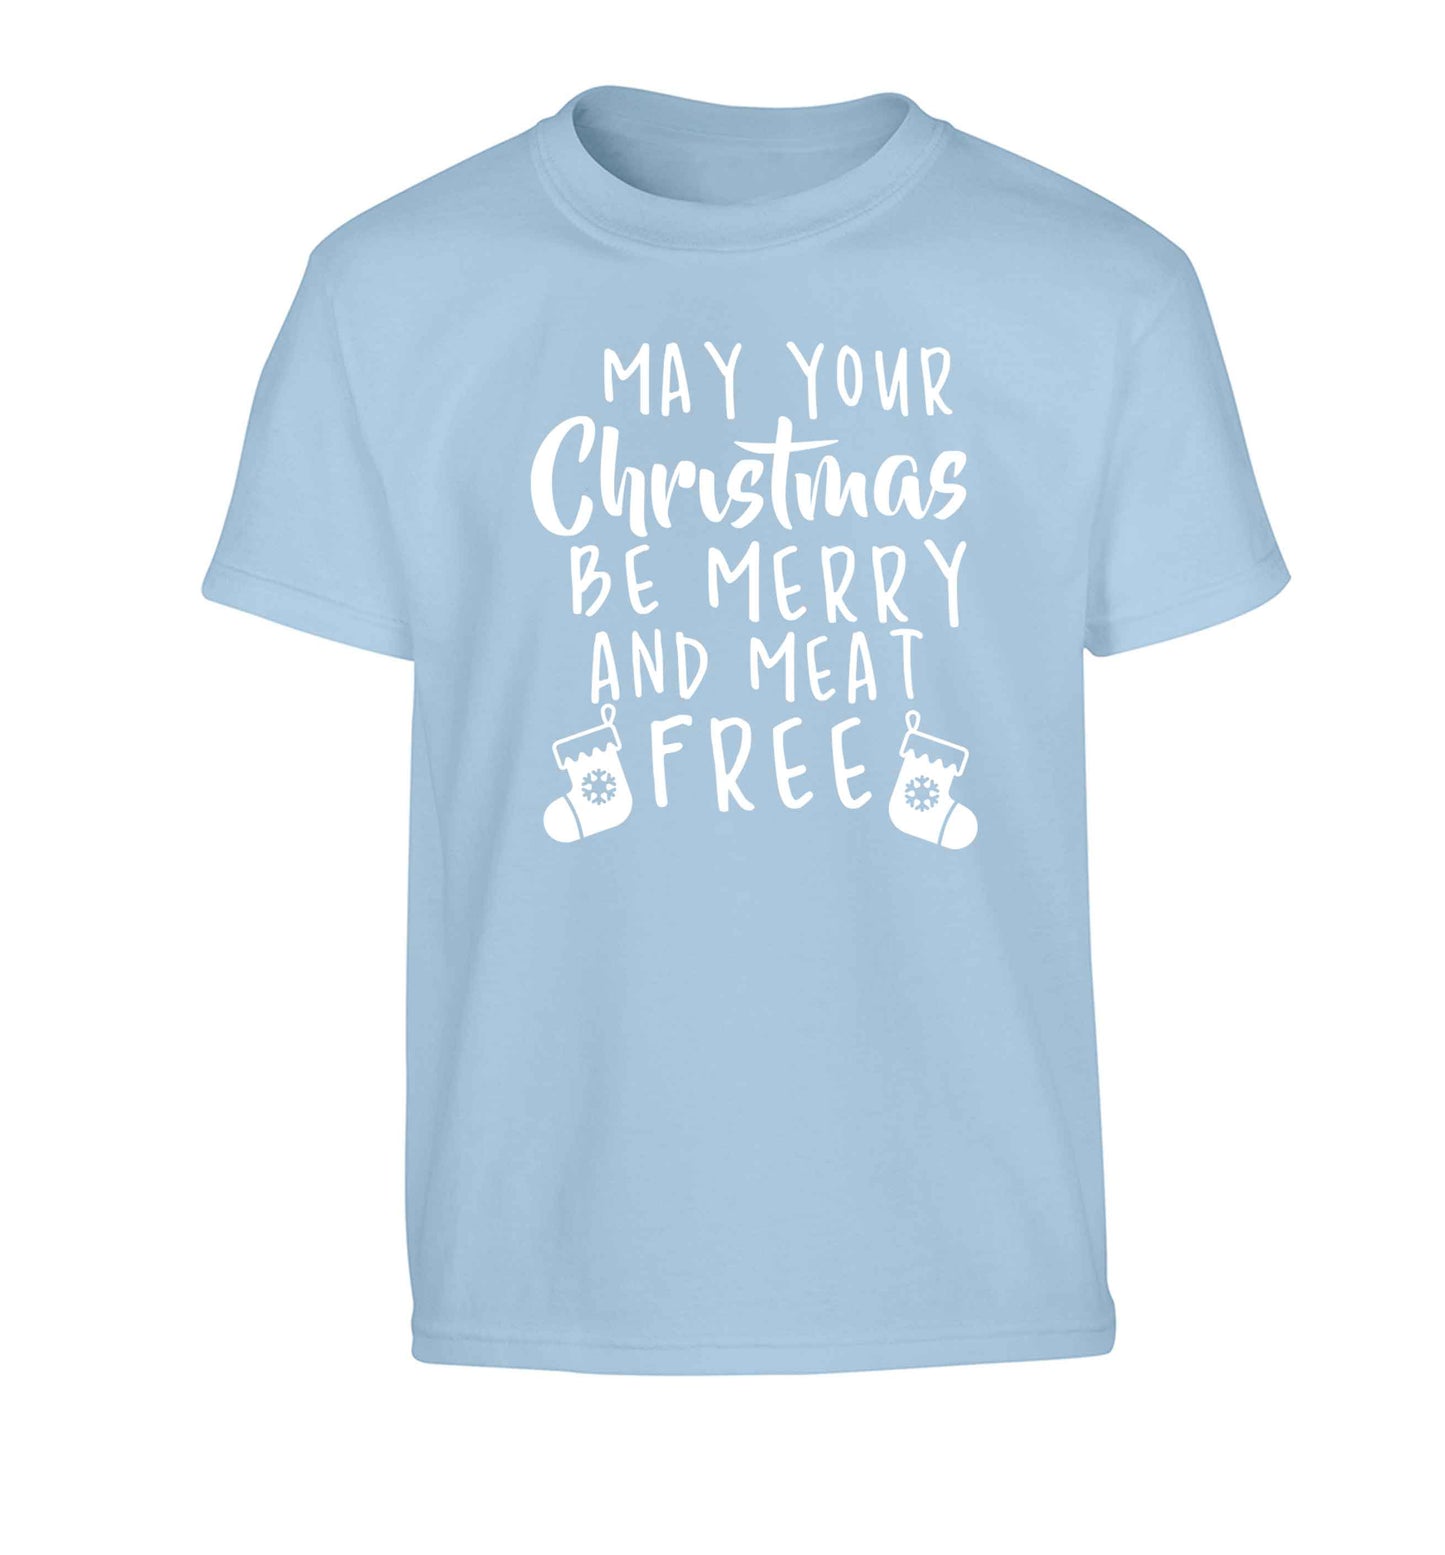 May your Christmas be merry and meat free Children's light blue Tshirt 12-13 Years